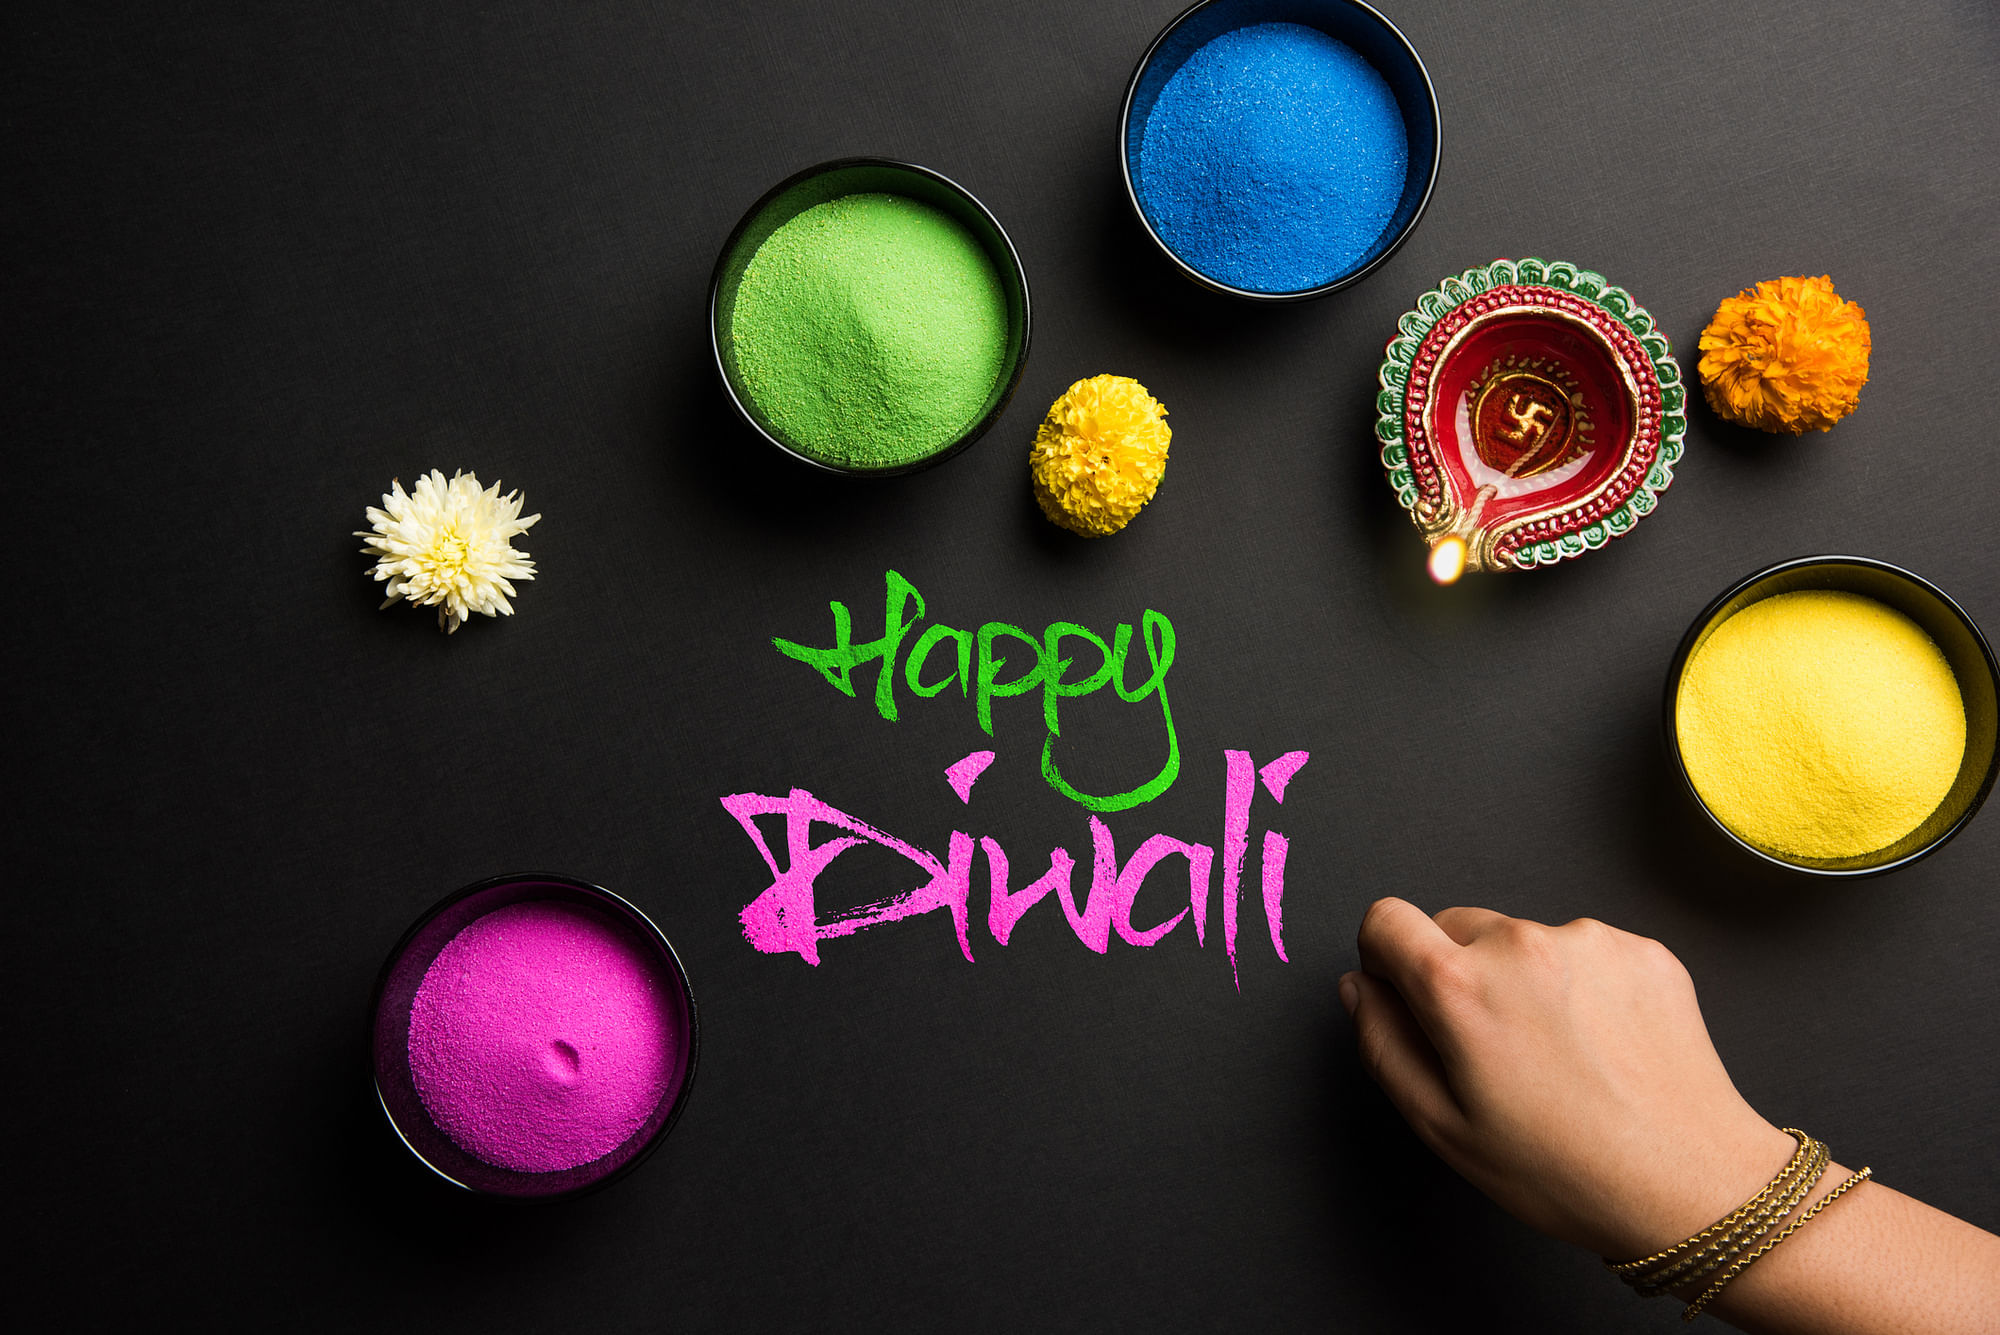 Happy Diwali 2022 Wishes Images, Status for WhatsApp & Facebook in Hindi  and English: Happy Deepavali Gifs, Greetings Cards, Messages, Shayari, SMS